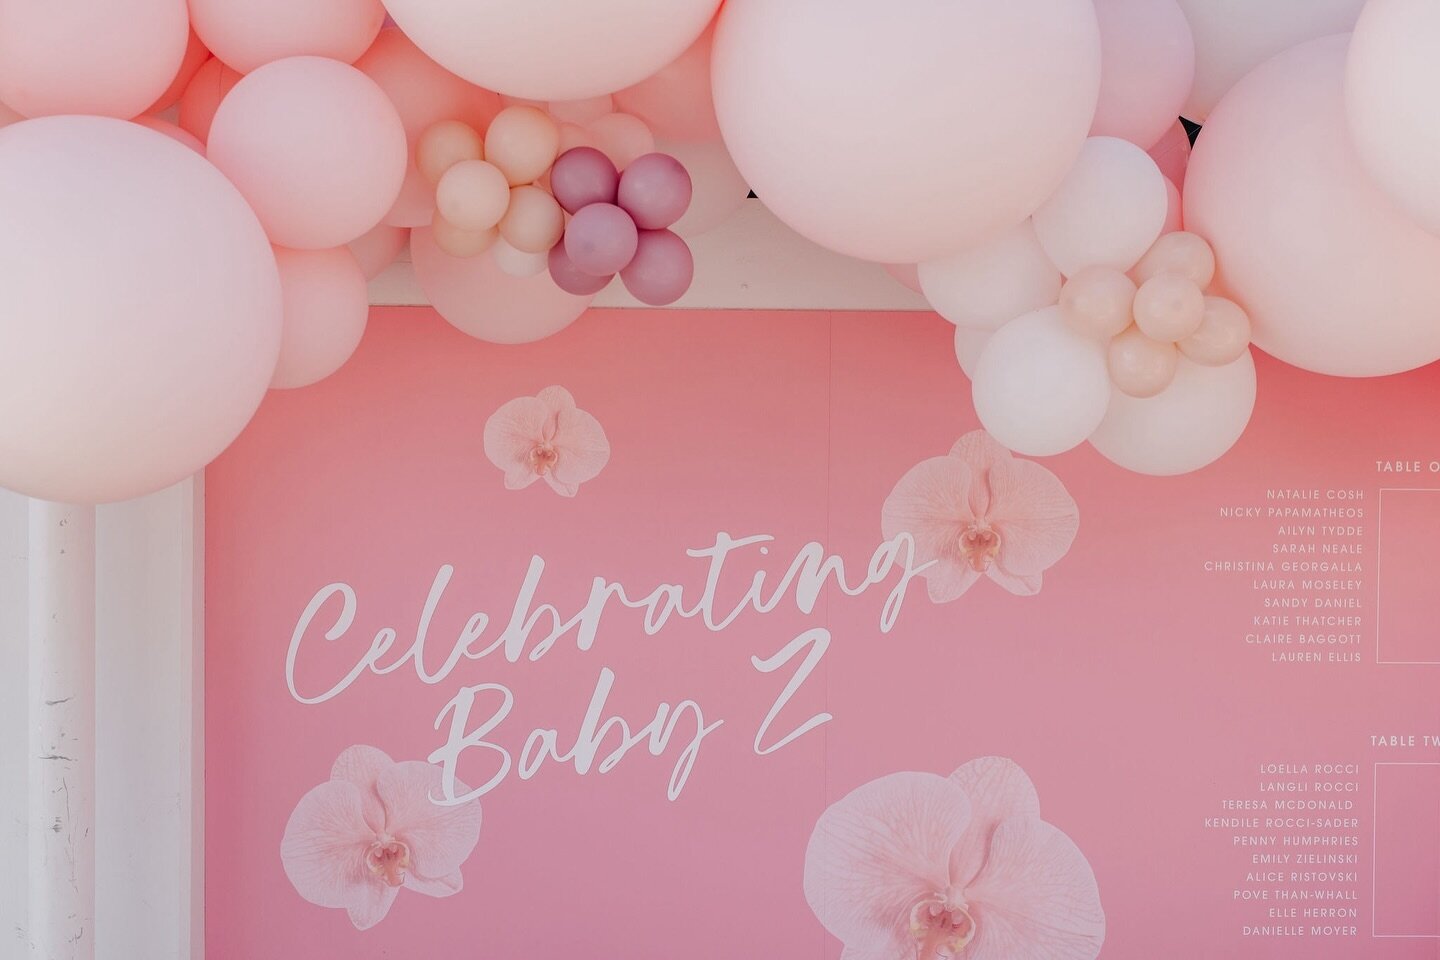 Private Events 💝

The baby shower of your dreams 💕🎀💕

We had so much fun putting this gorgeous baby shower together for beautiful Taylia.  As a boy mum, it was pretty fab to go all out with the pink theming 💓

We&rsquo;re loving our move into pr